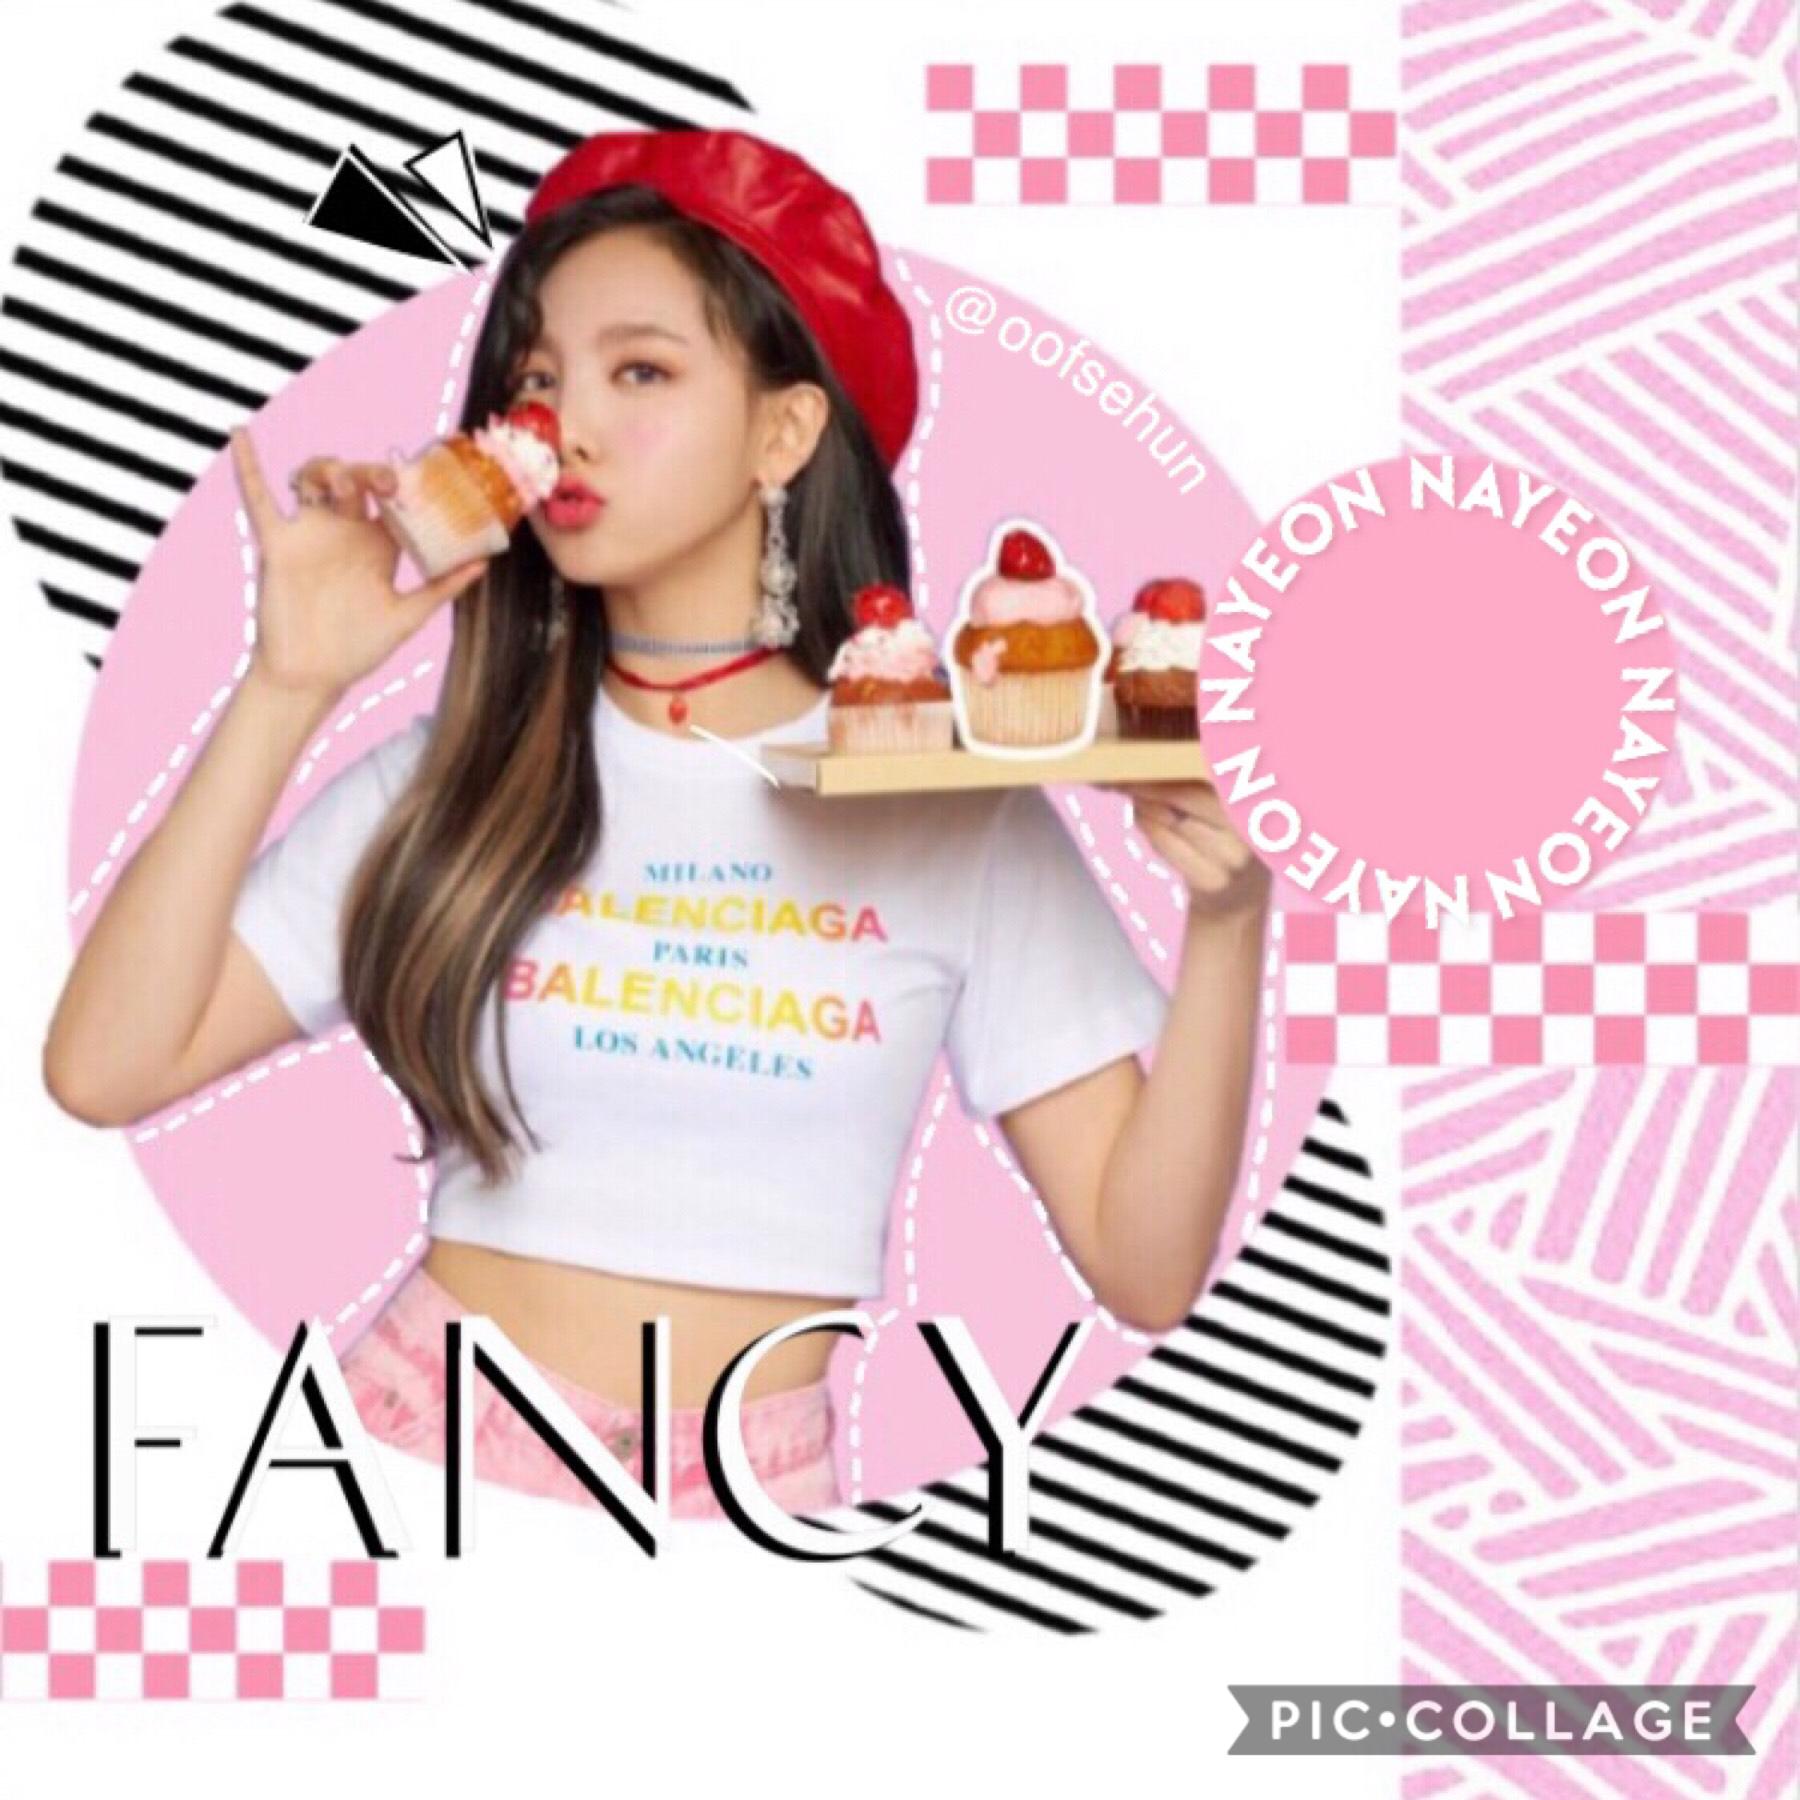 ☁️𝒇𝒂𝒏𝒄𝒚 (tap)
• this was inspired by an edit that i saw on pinterest (check remixes) :)) •
this is one of the worst edits ever lol
and...it’s not blackpink omg (aMeN)
anyways fancy is a bop 👌
qotd: who’s your bias? (twice ofc djsjd)
a: i still need to cho